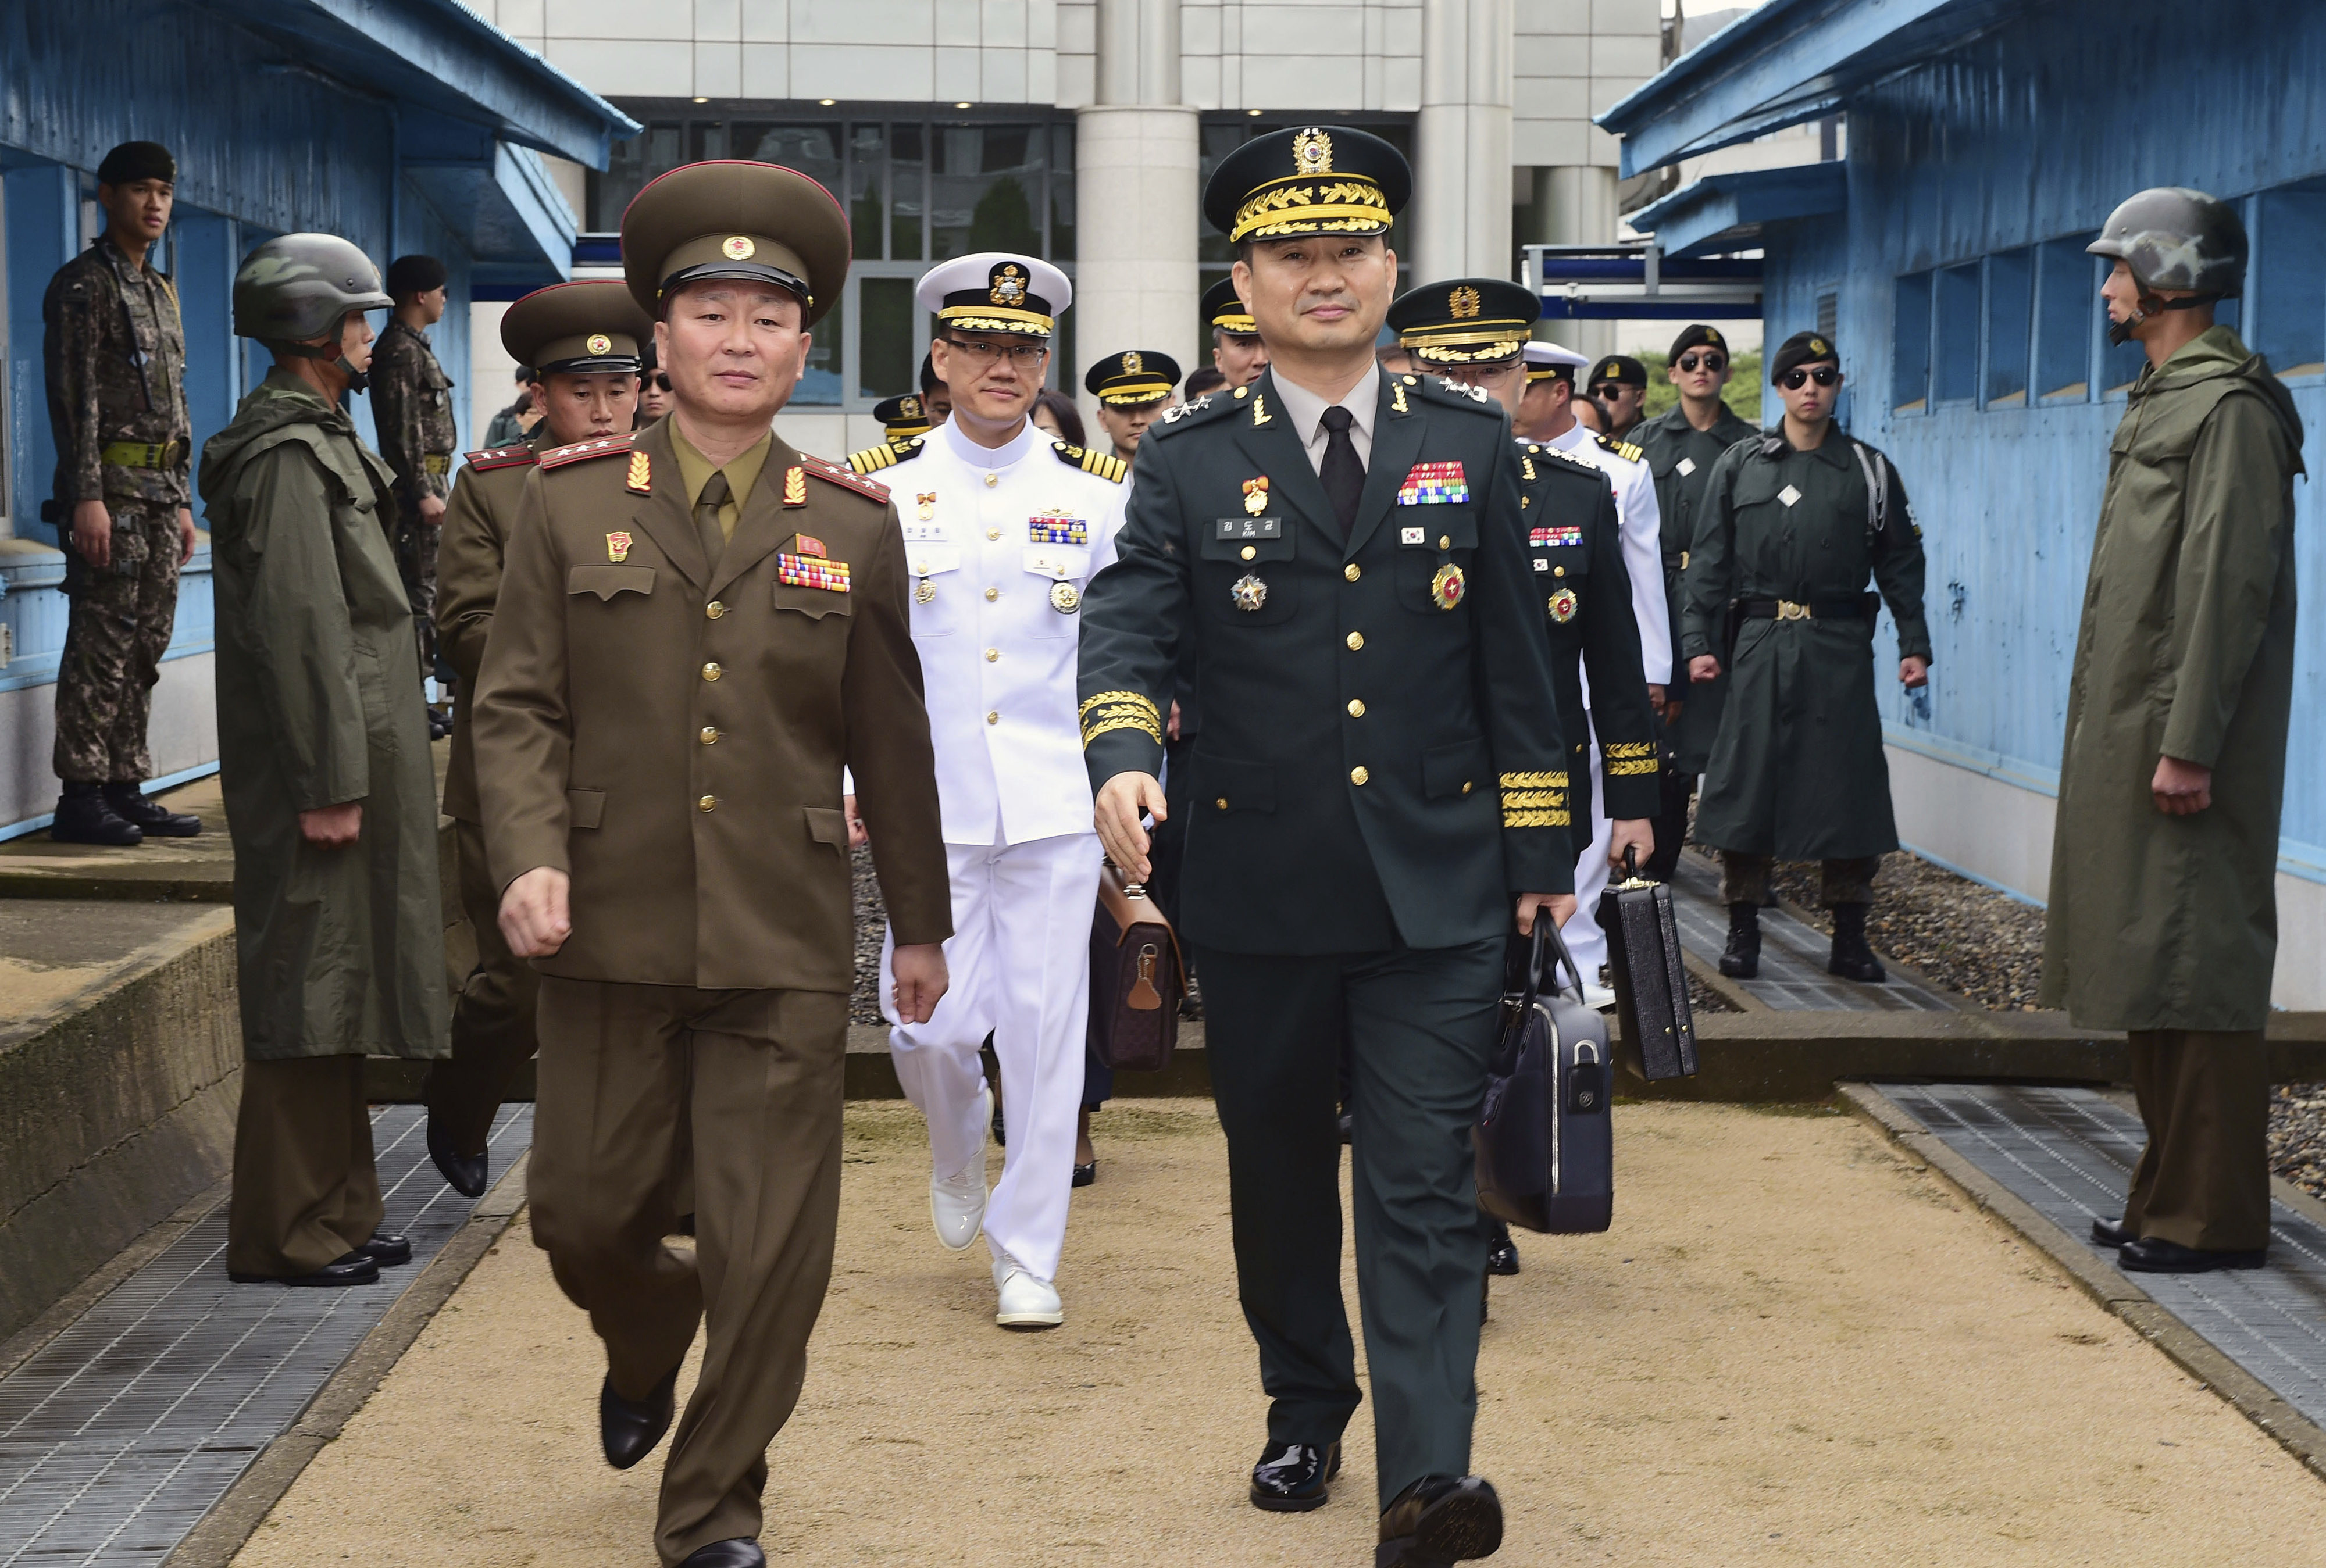 In this photo provided by the South Korea Defense Ministry, South Korean Maj. Gen. Kim Do-gyun, center right, is escorted by a North Korean officer after crossing to North Korea for the meeting at the northern side of Panmunjom in the Demilitarized Zone, North Korea, Thursday, June 14, 2018. The two Koreas were holding rare high-level military talks Thursday to discuss reducing tensions across their heavily fortified border. [Photo: South Korea Defense Ministry via AP]